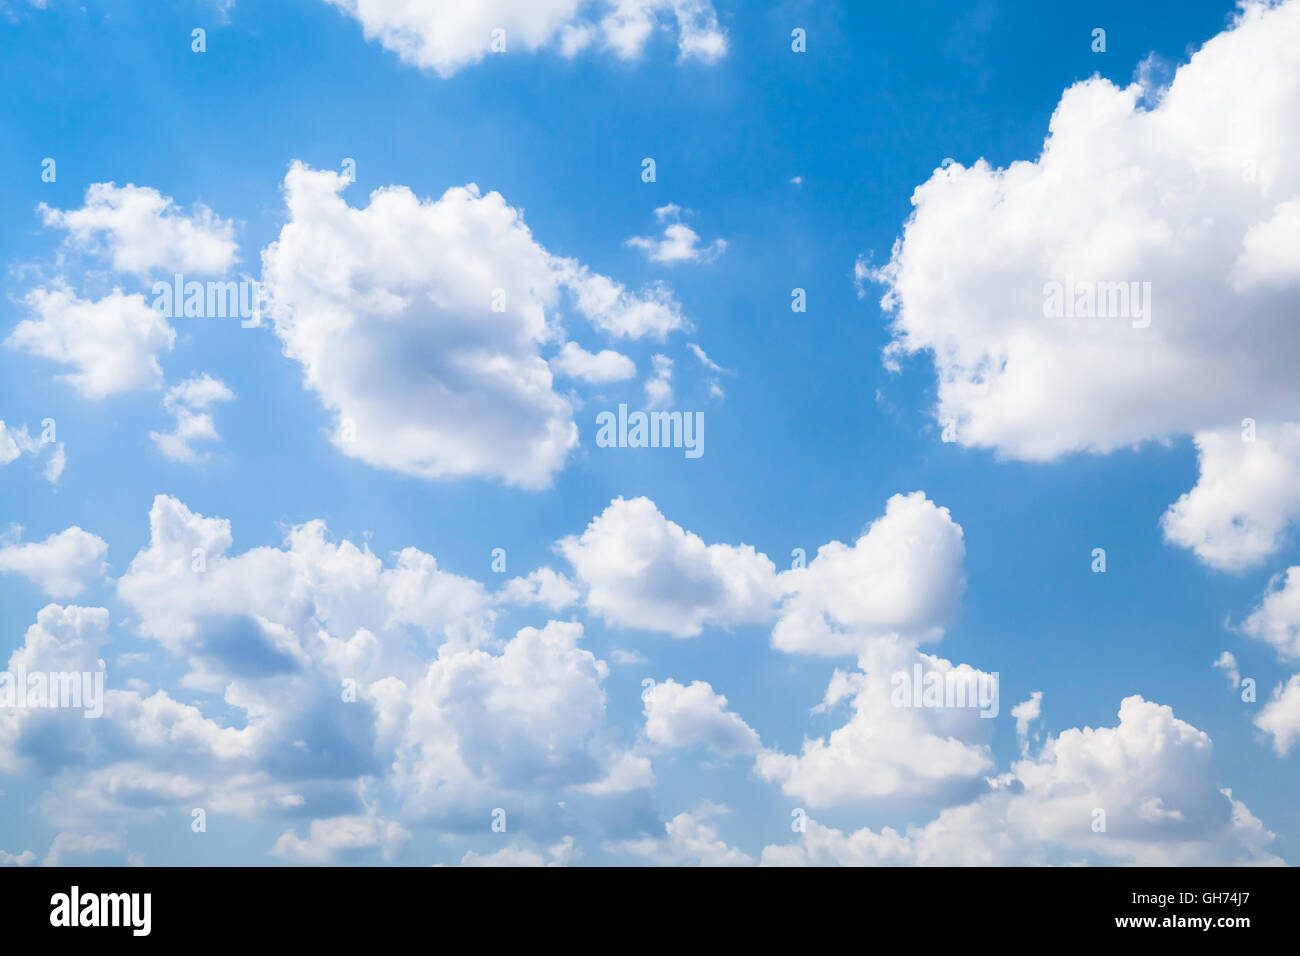 Cumulus clouds in bright blue sky at daytime, natural background photo Stock Photo